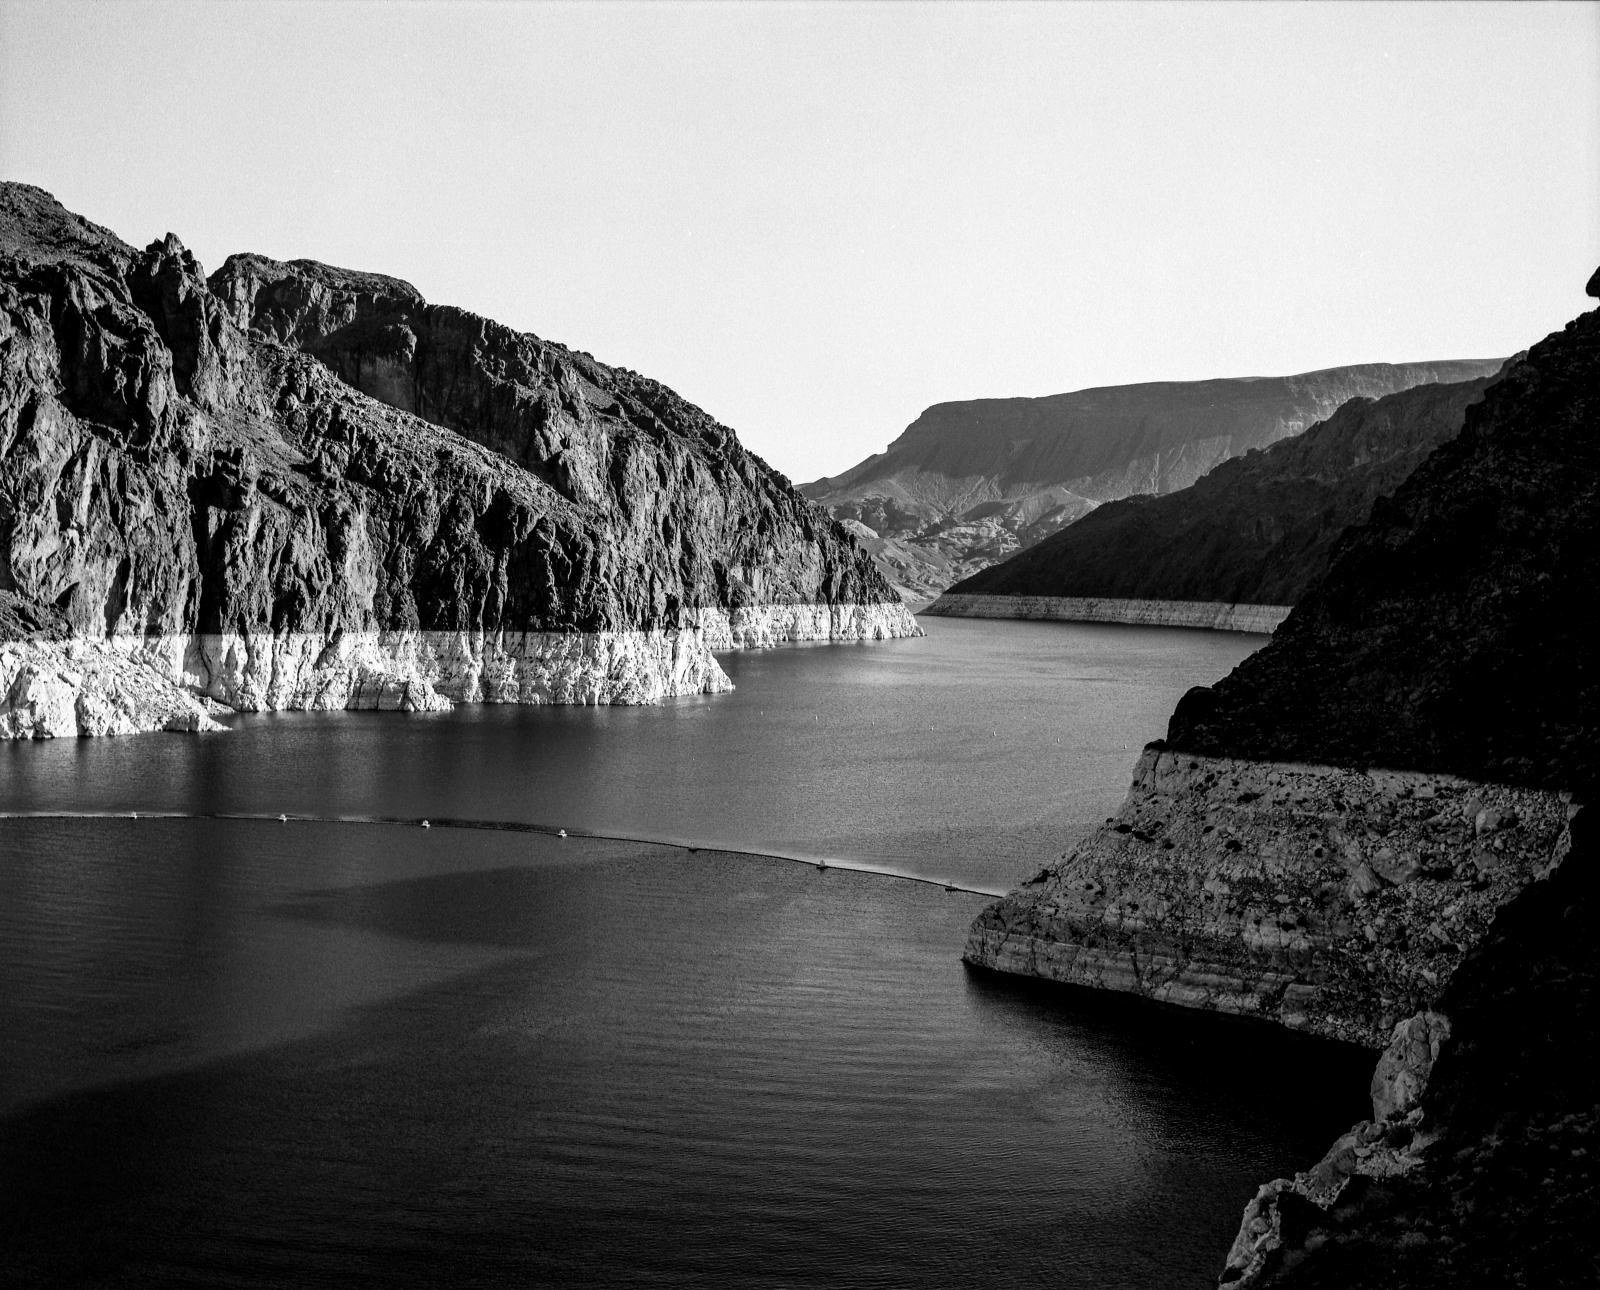 Lake Mead 040915205 | Buy this image